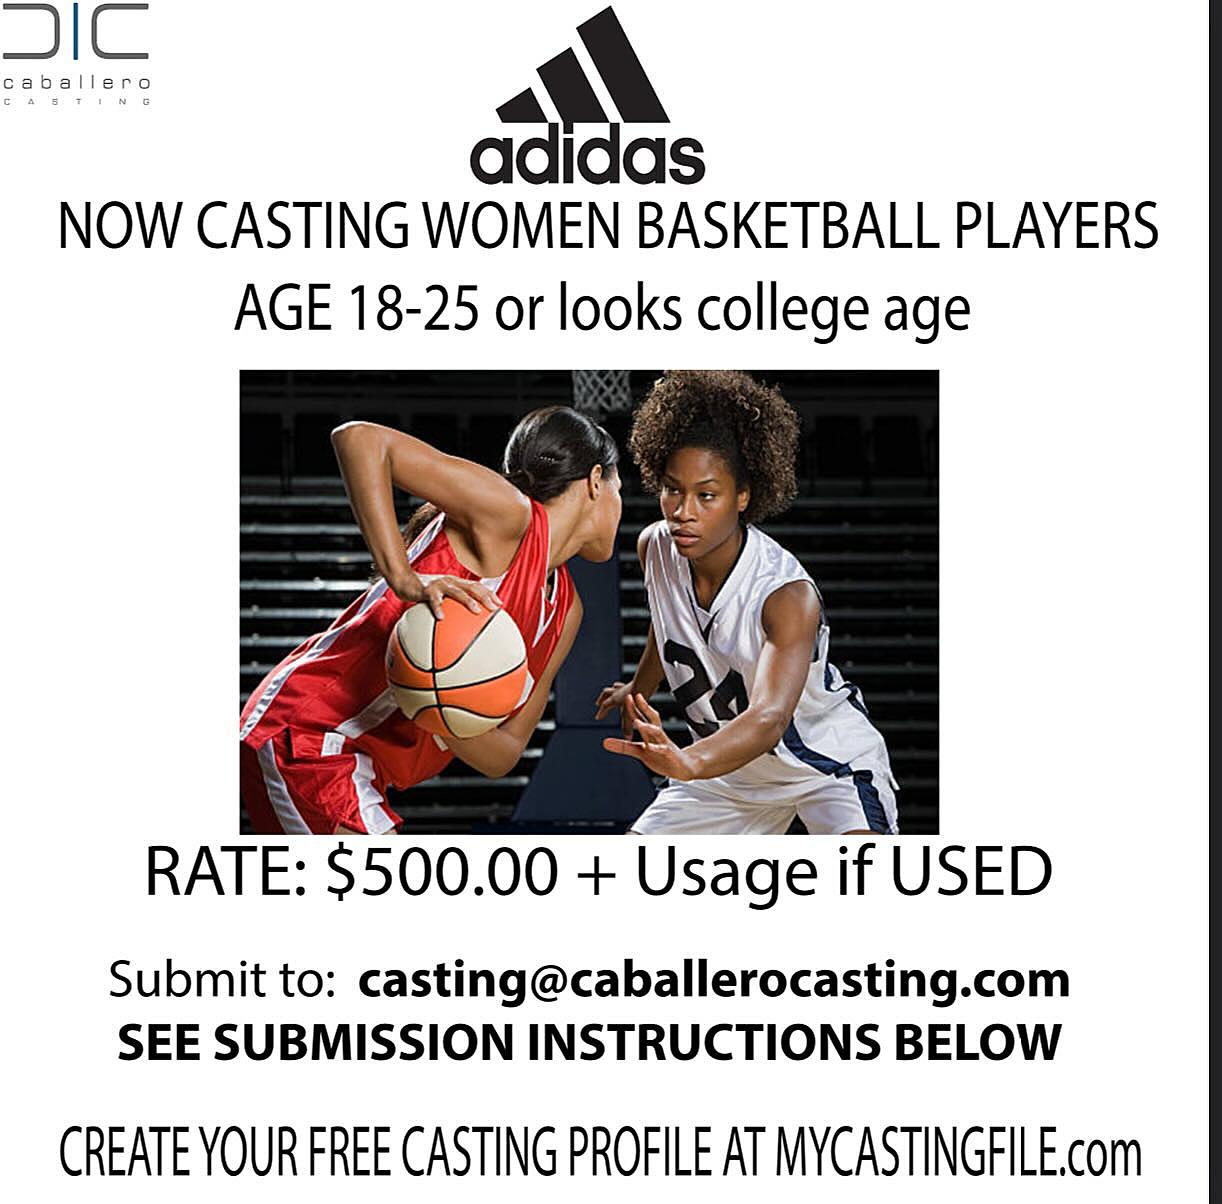 Apply for Adidas Commercial Being Shot in Baton Rouge, Louisiana